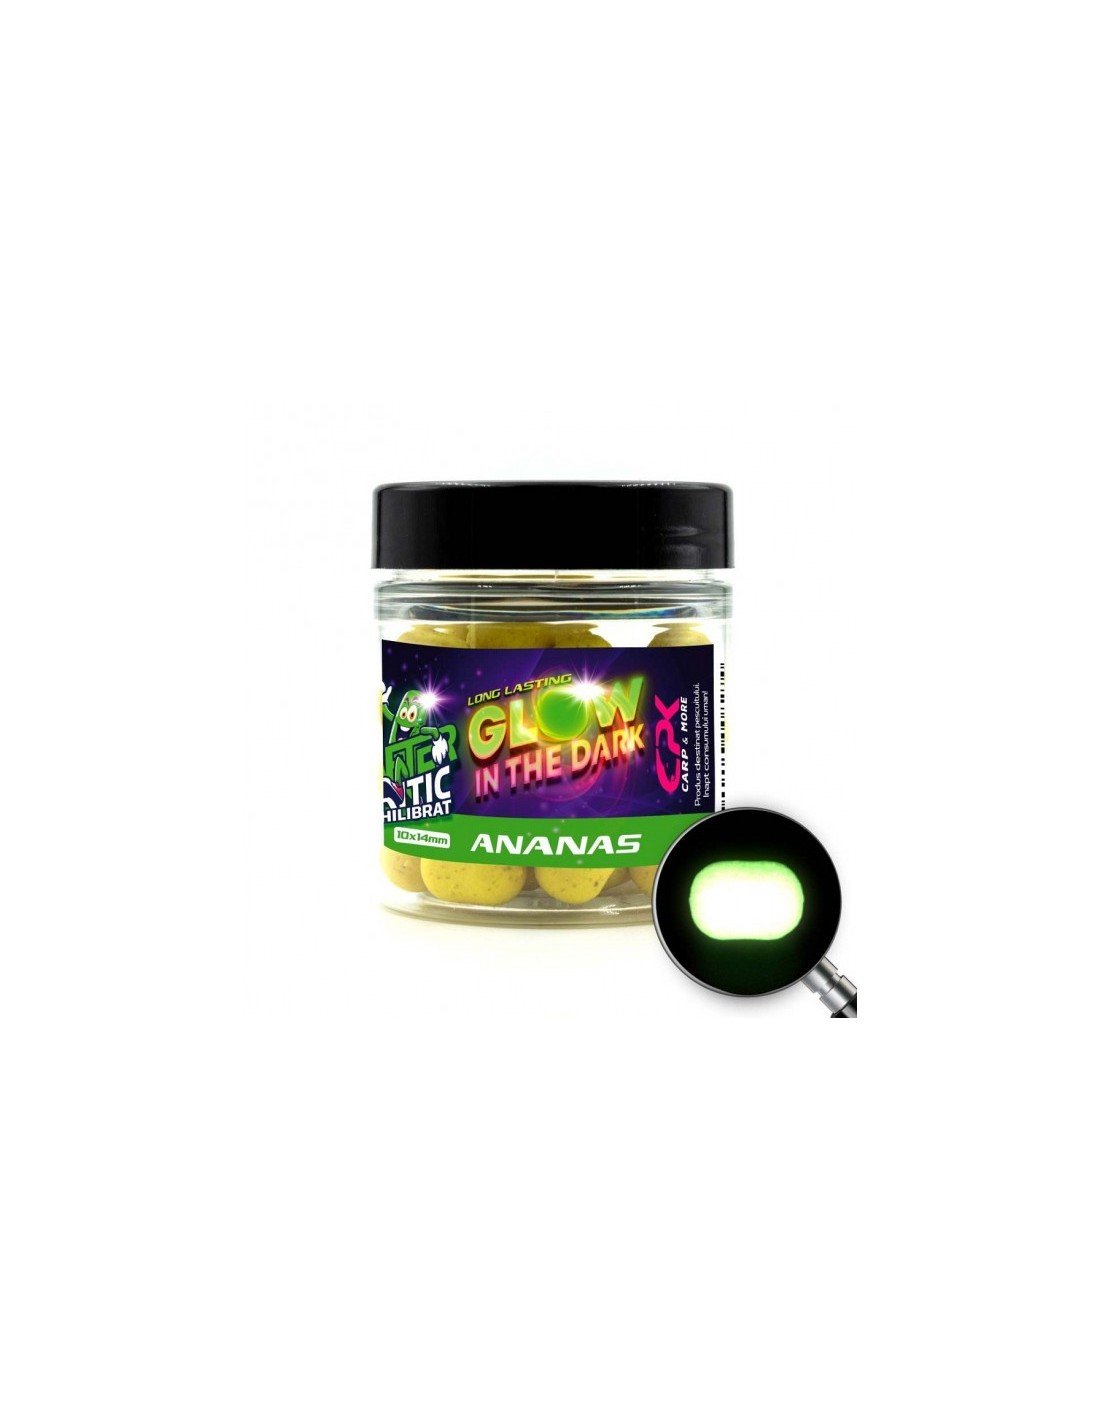 CPK Wafter Glow in the Dark Ananas критично балансирани дъмбели